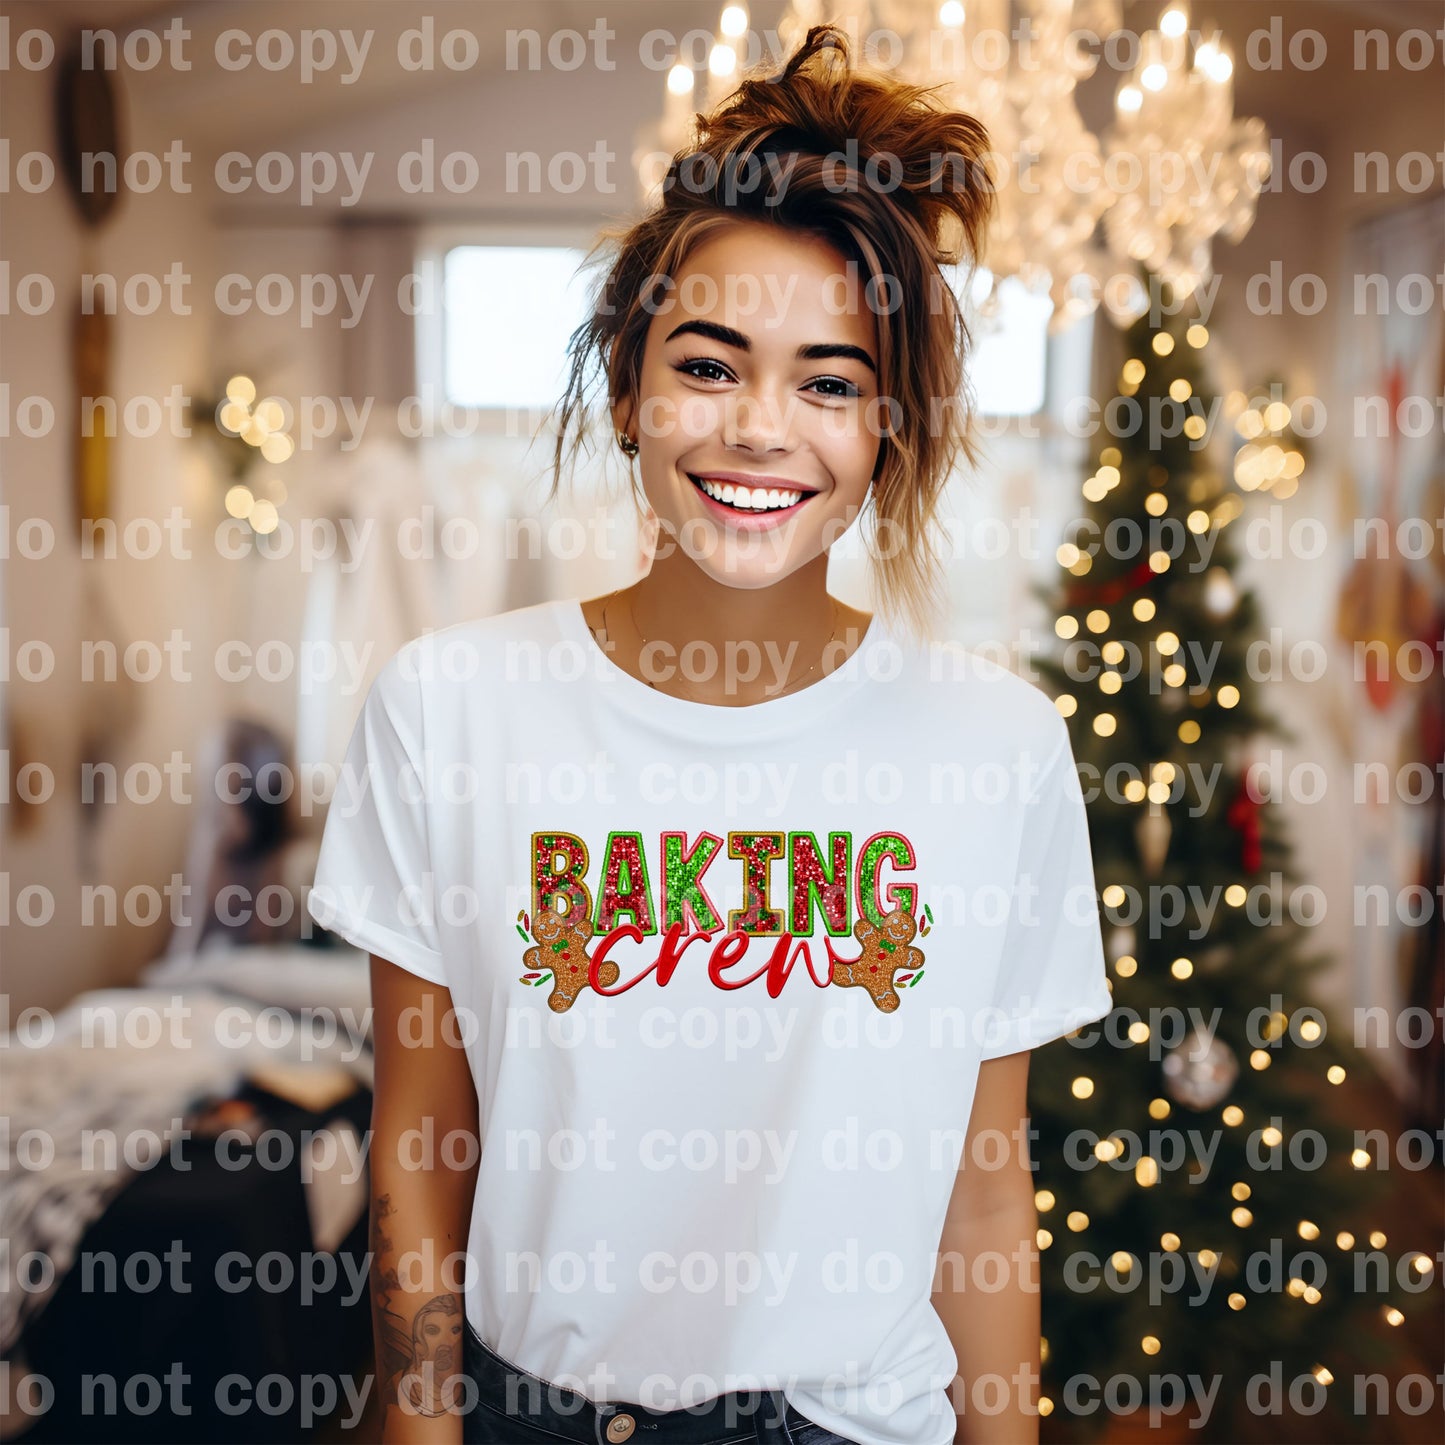 Baking Crew Dream Print or Sublimation Print